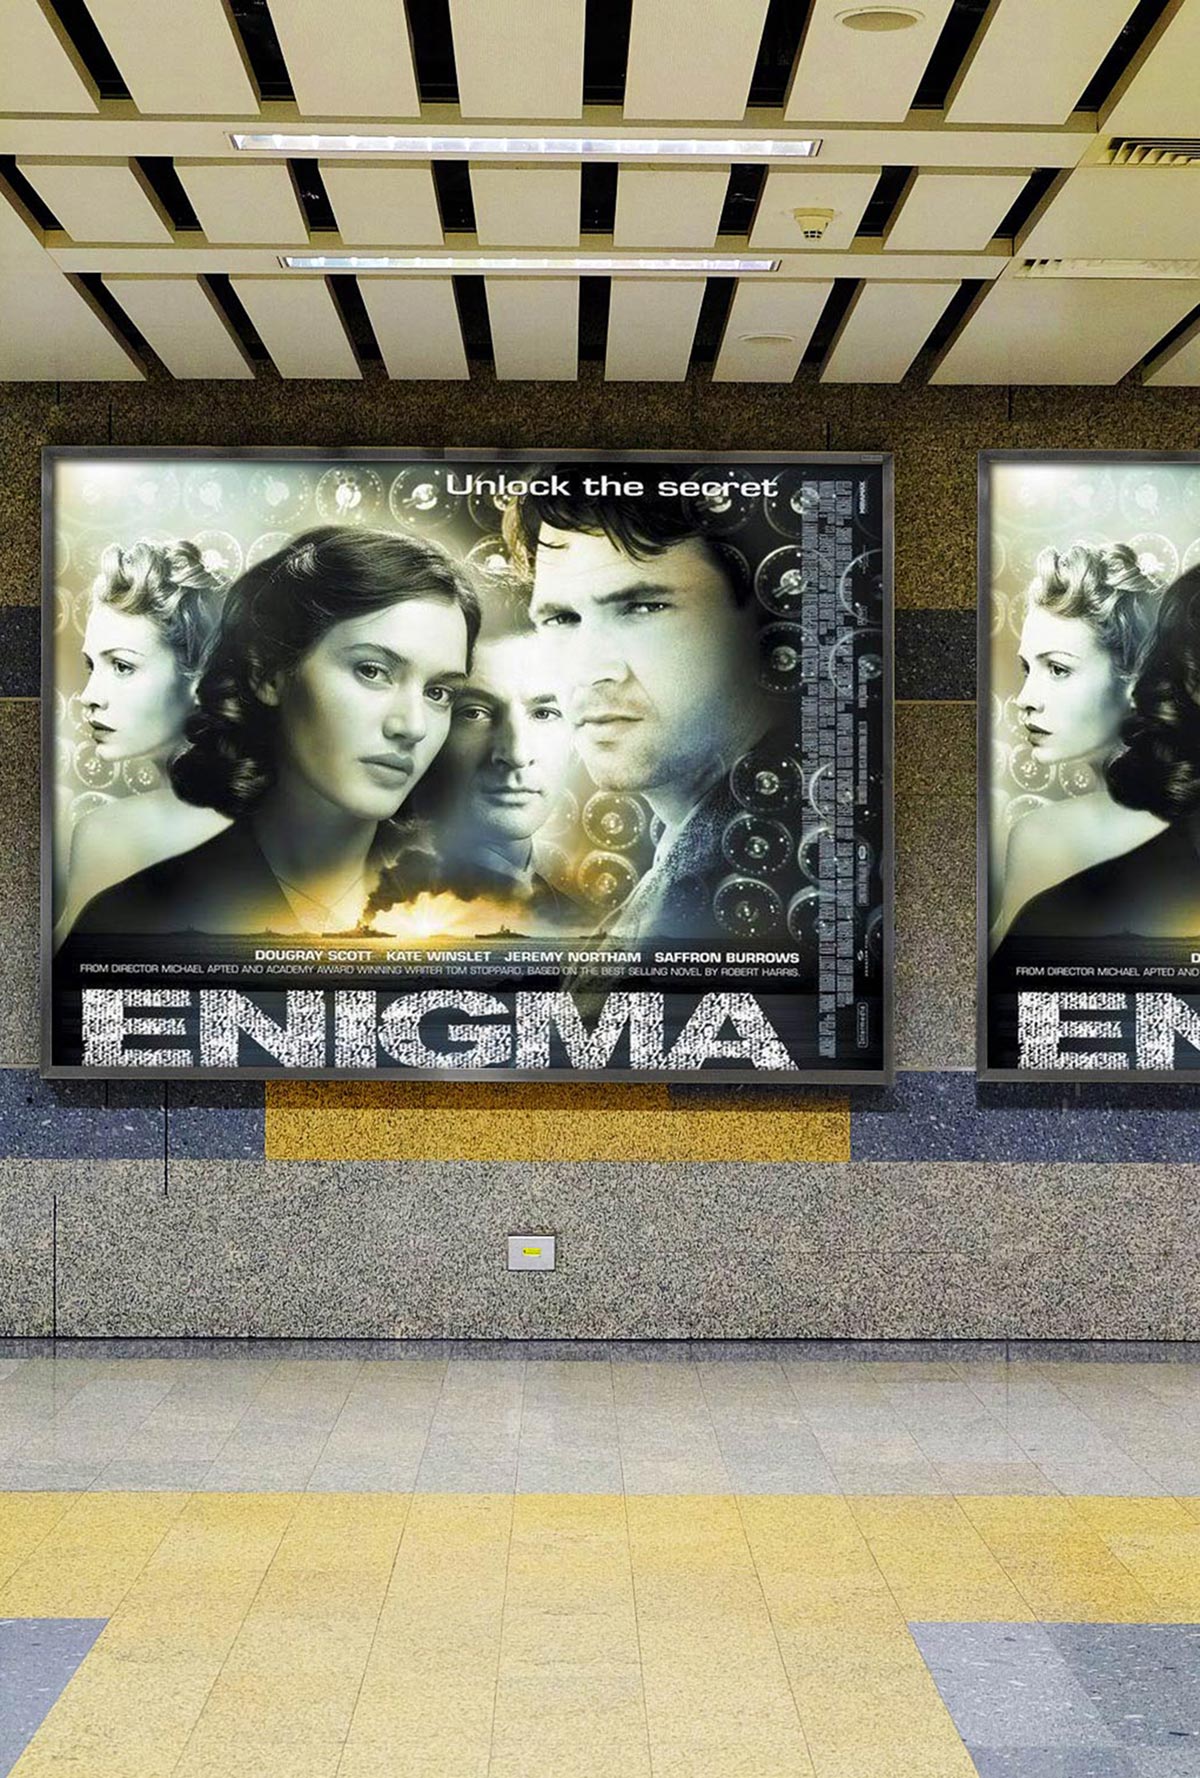 081_dreamogram-iconisus-key-art-movie-poster-enigma_vertical-cover